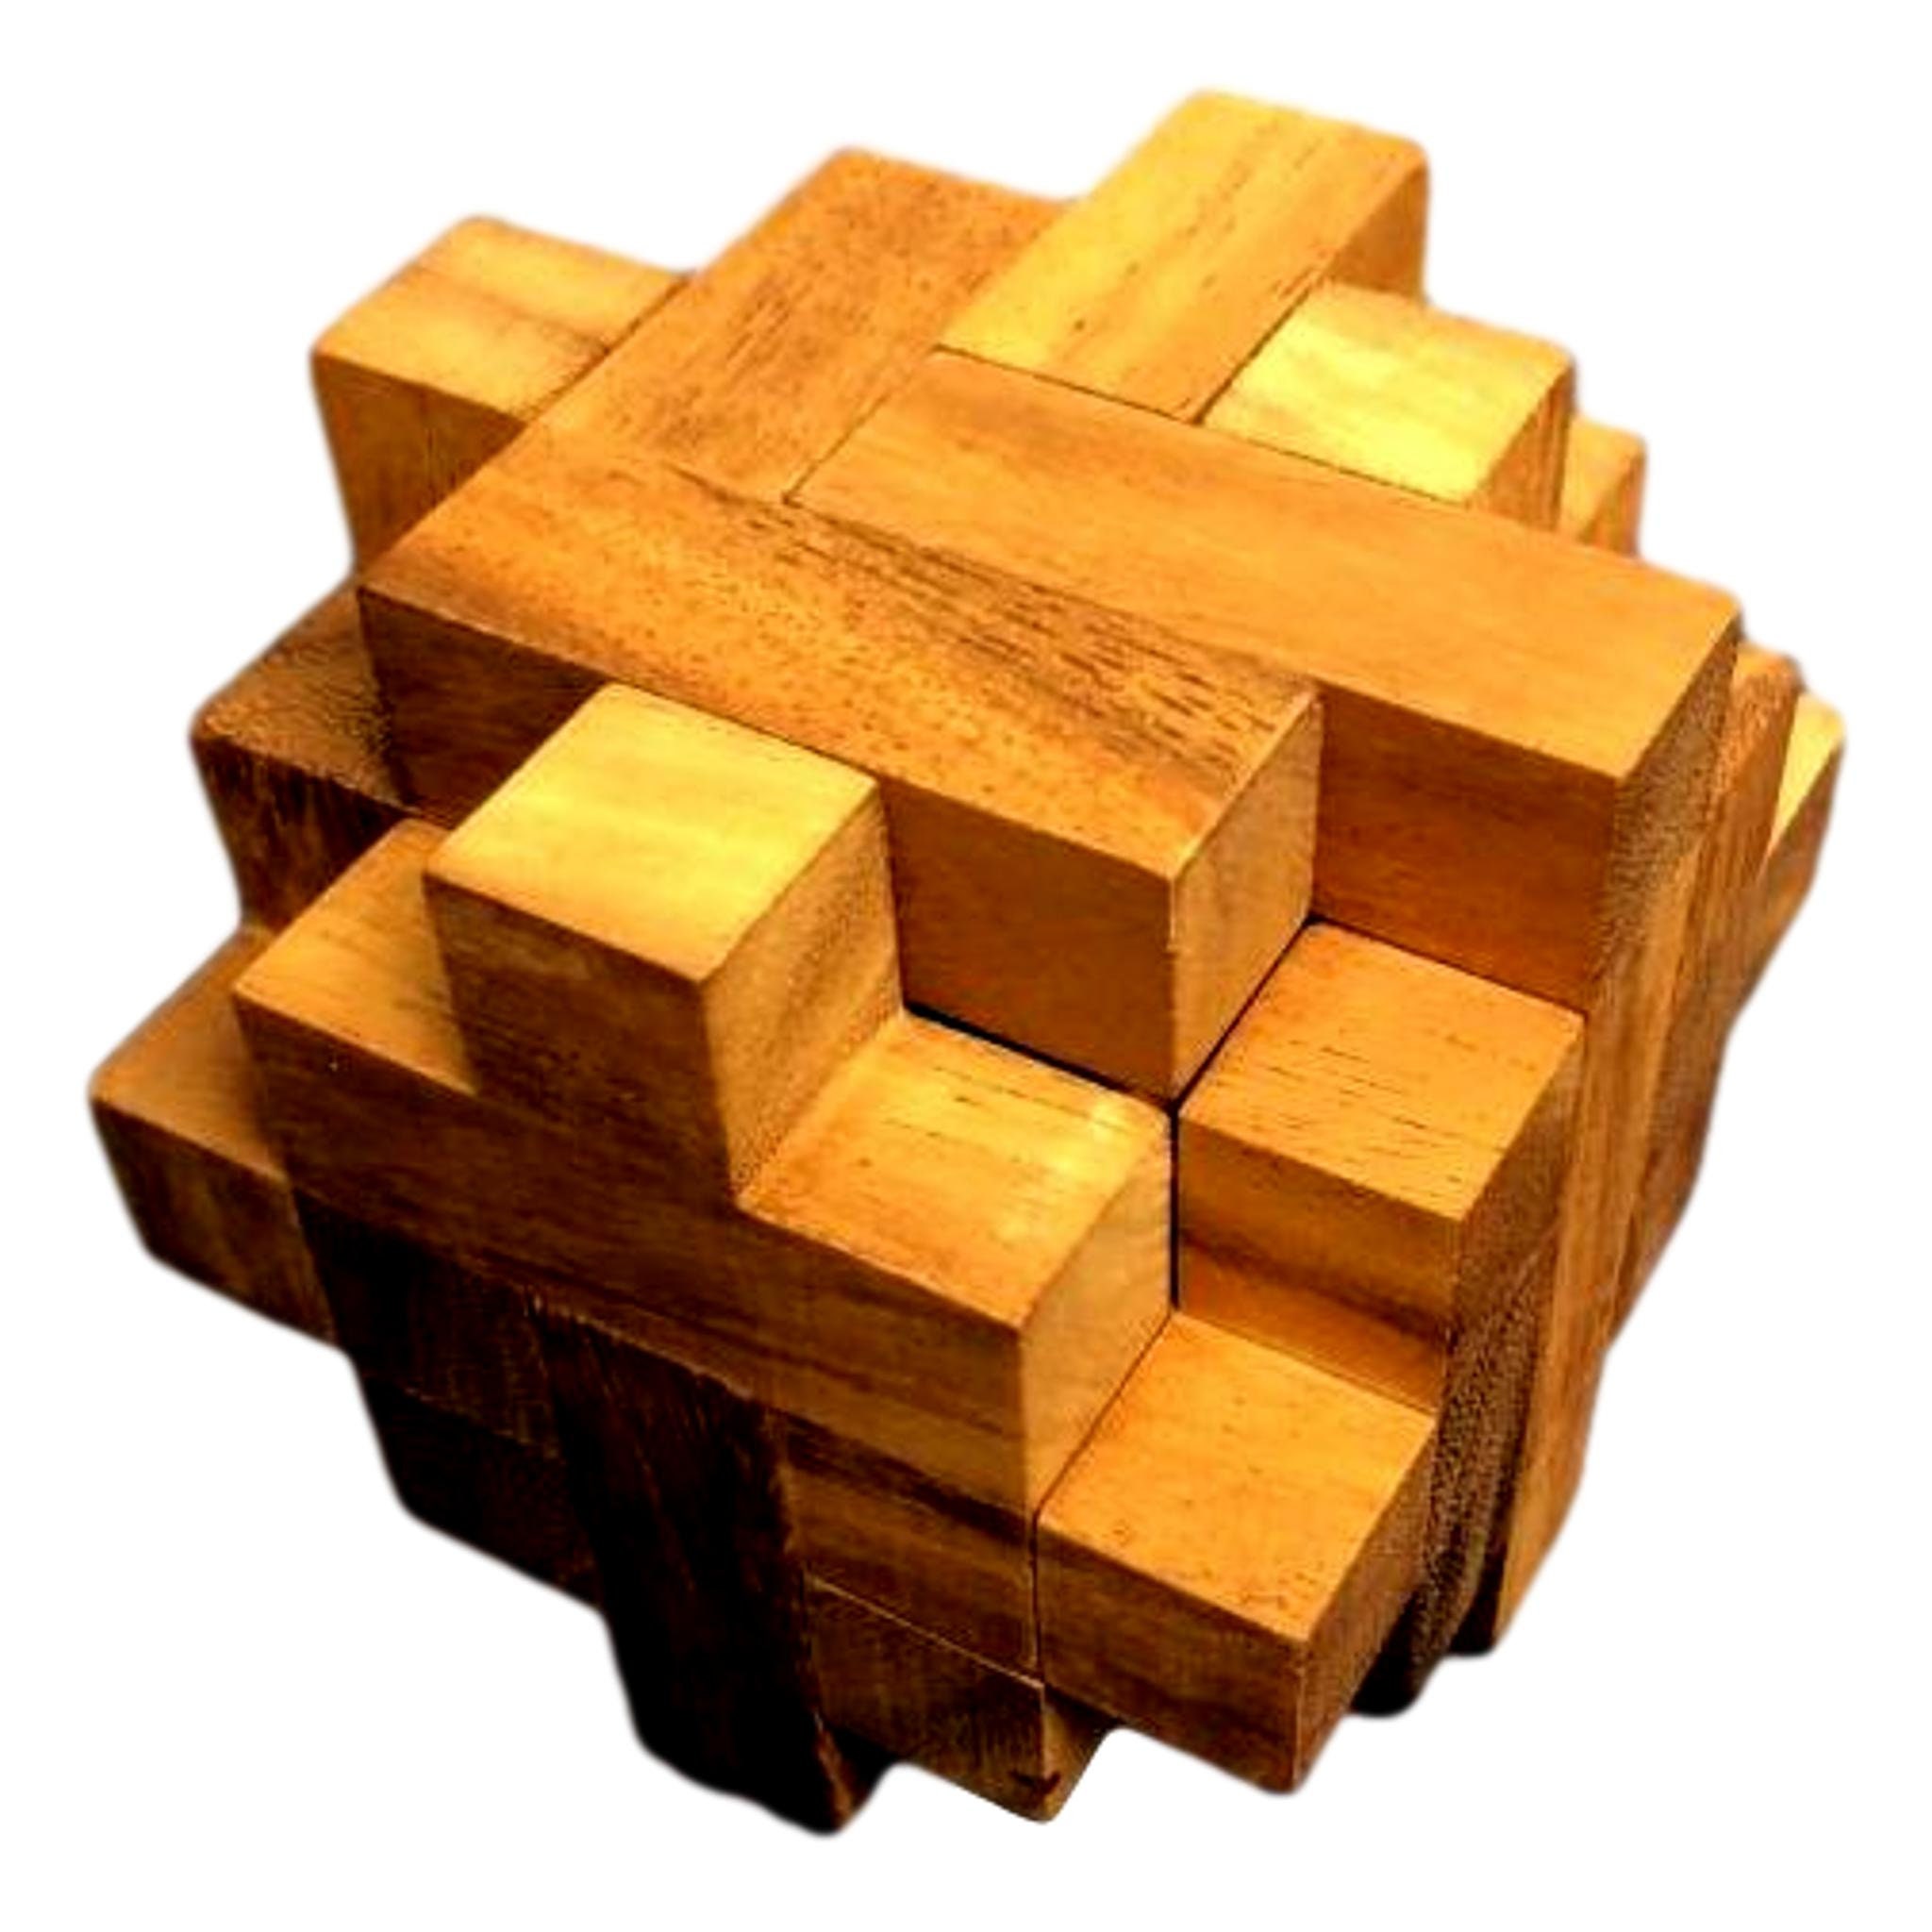 Ramube Octahedron - A Very Challenging Wood Puzzle